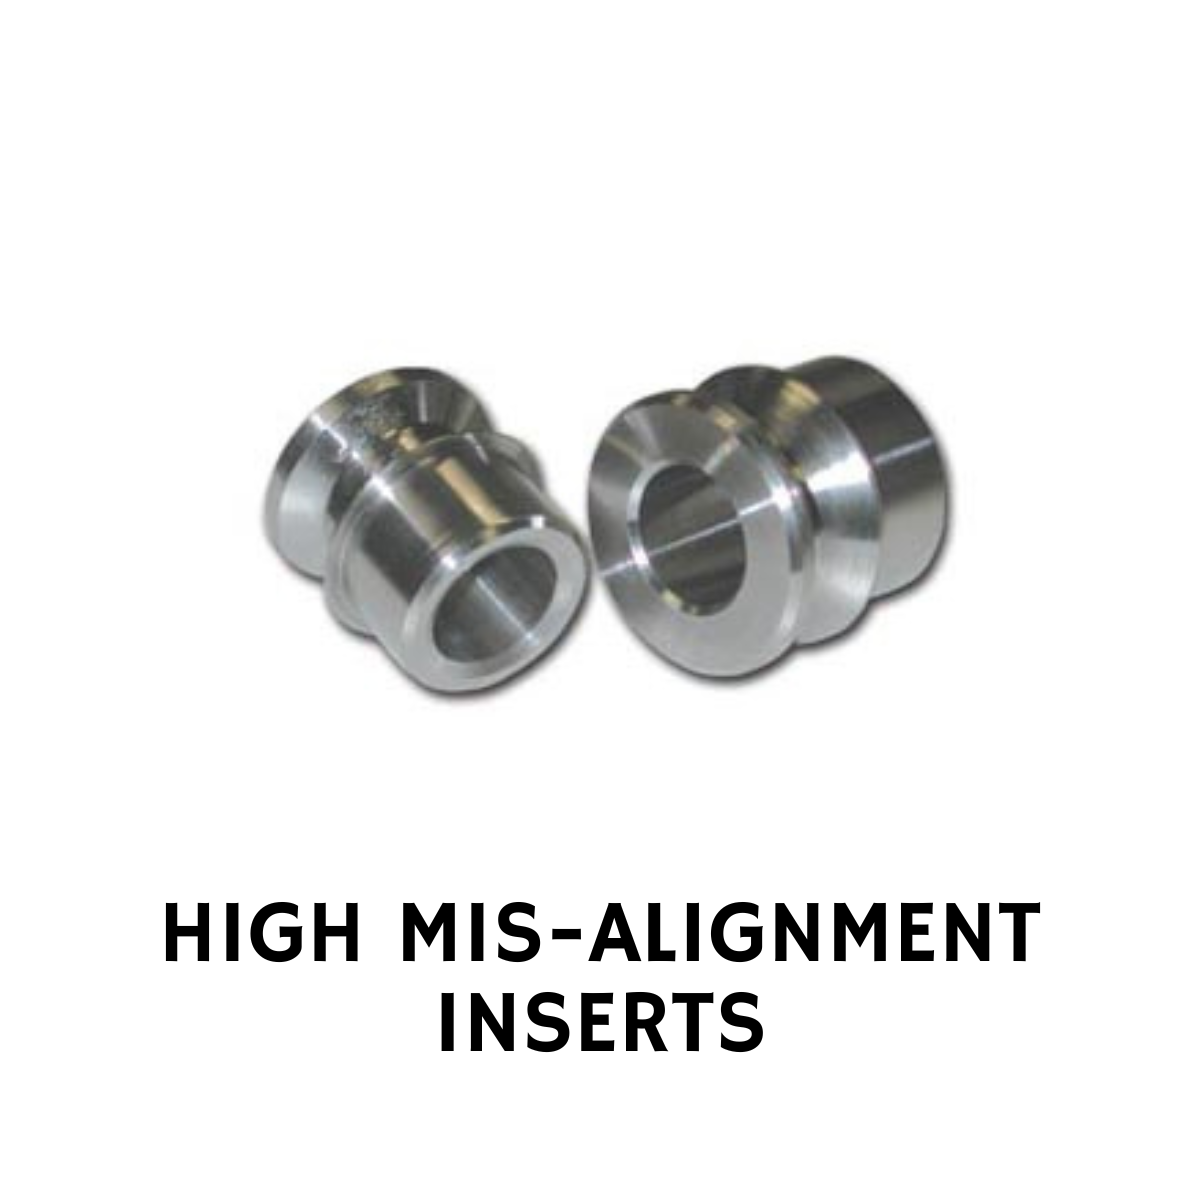 HIGH MIS-ALIGNMENT INSERTS